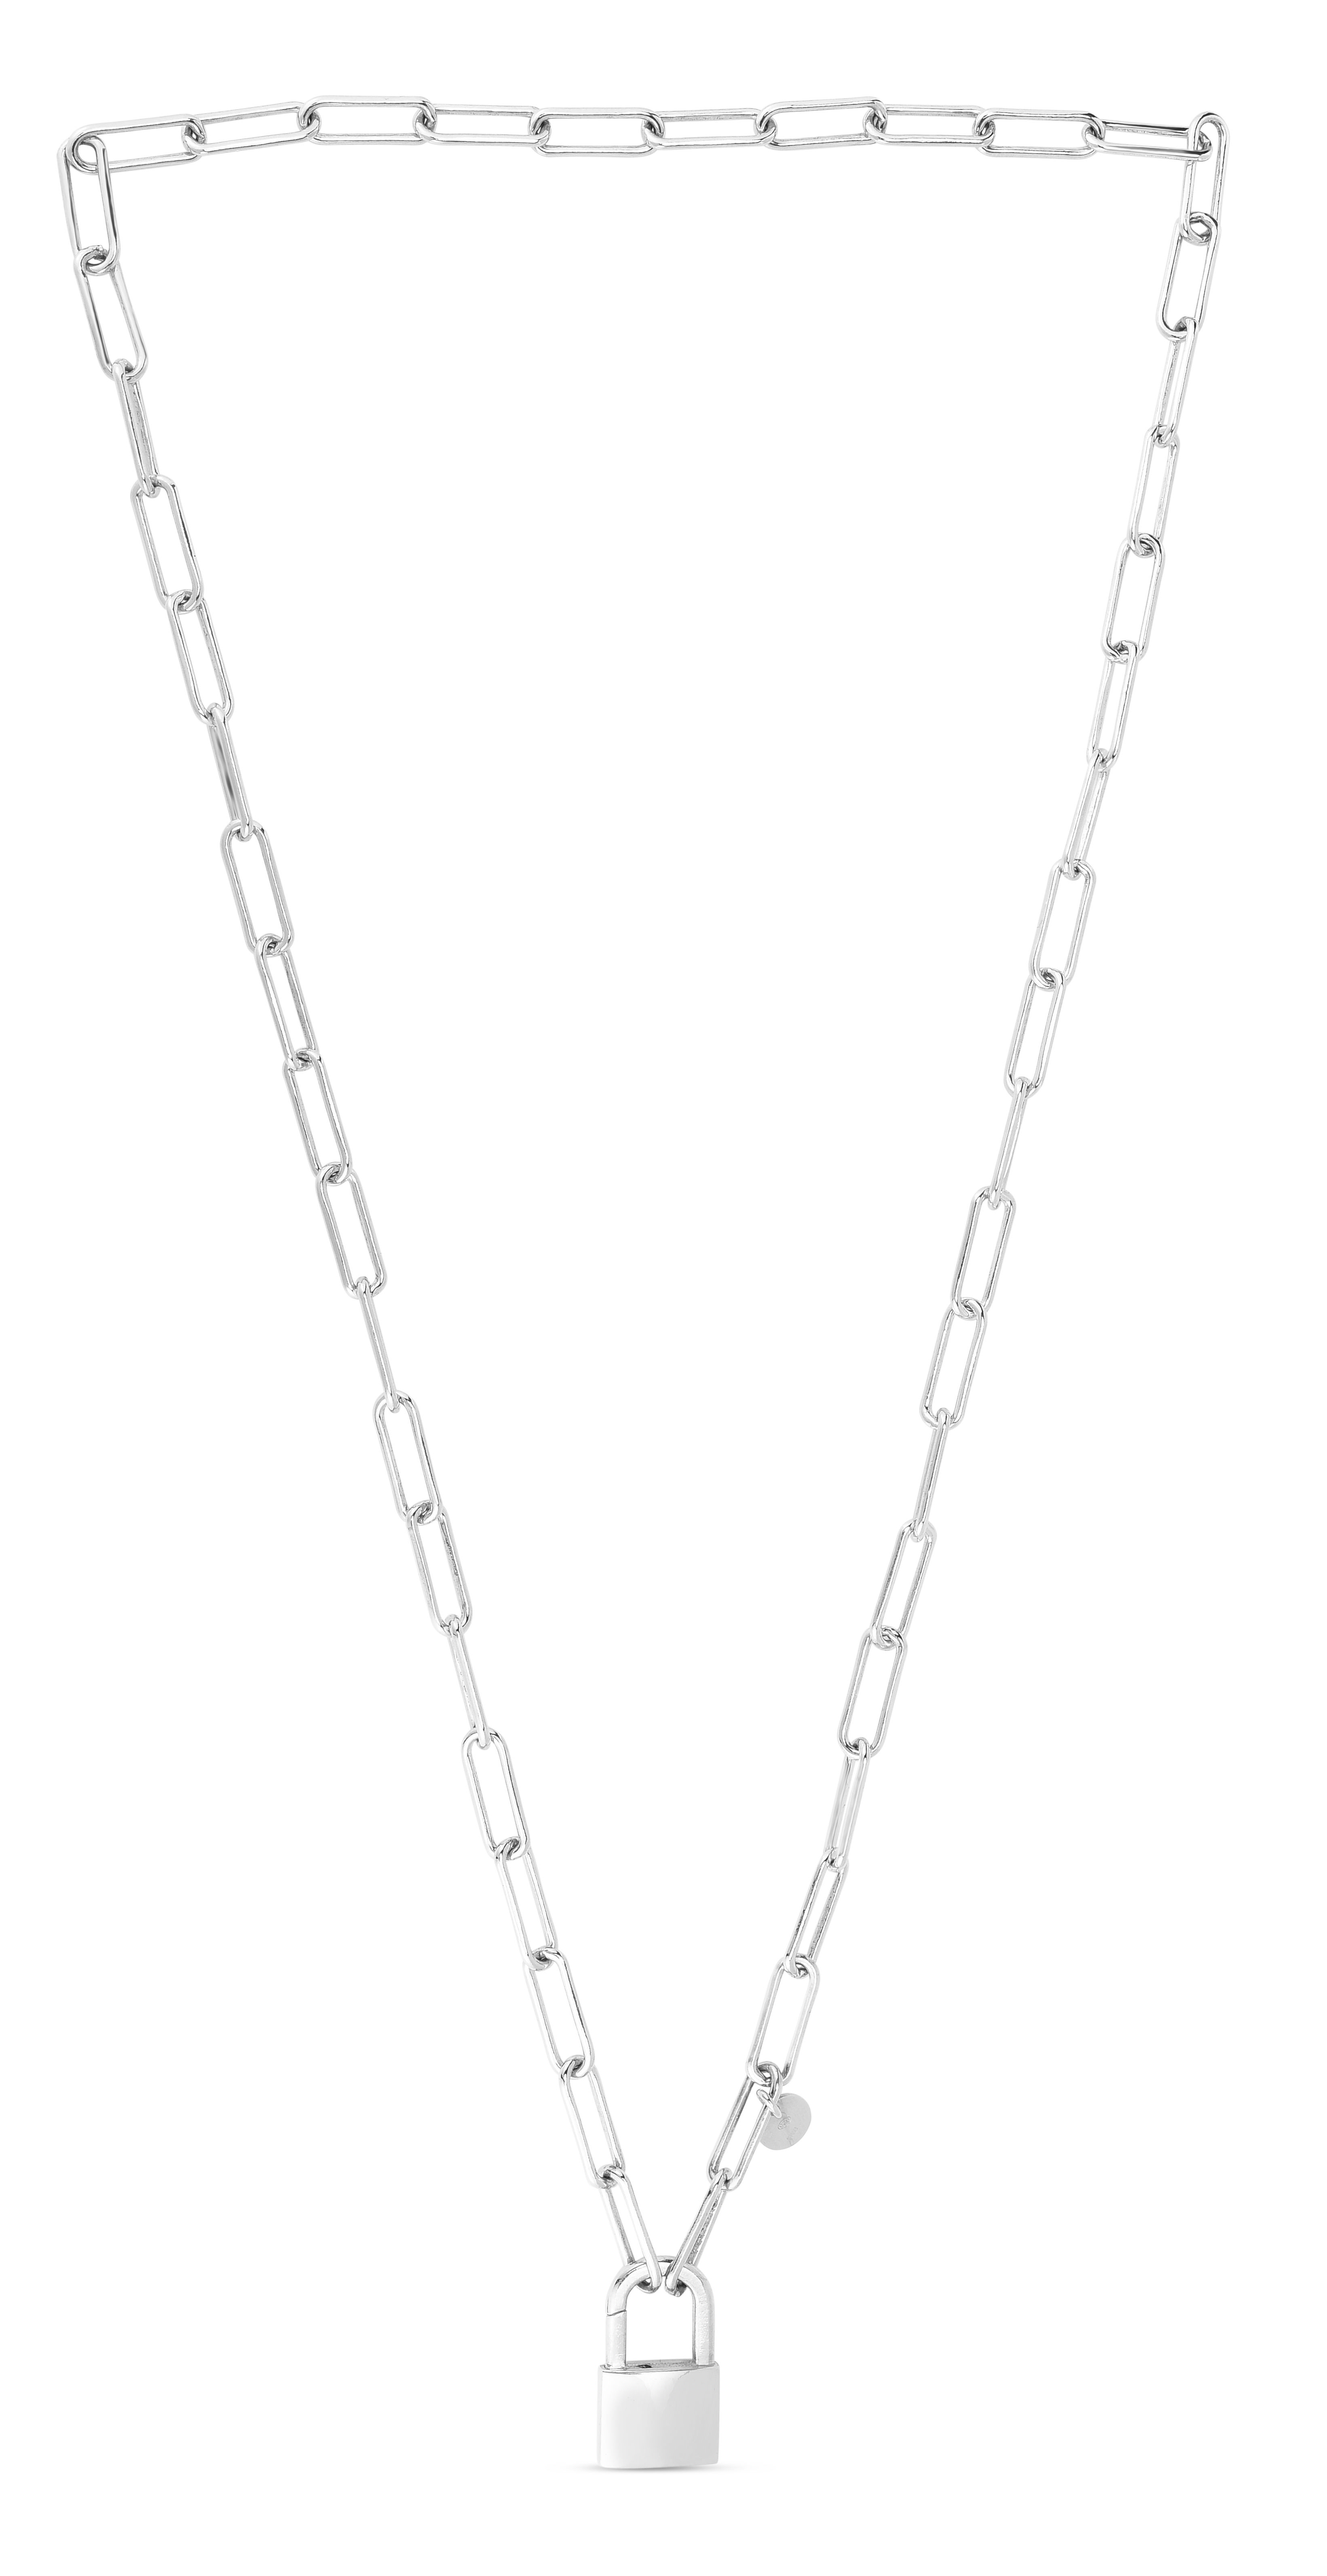 Lock Paperclip Chain Necklace Lock Chain Link Necklace -  Canada